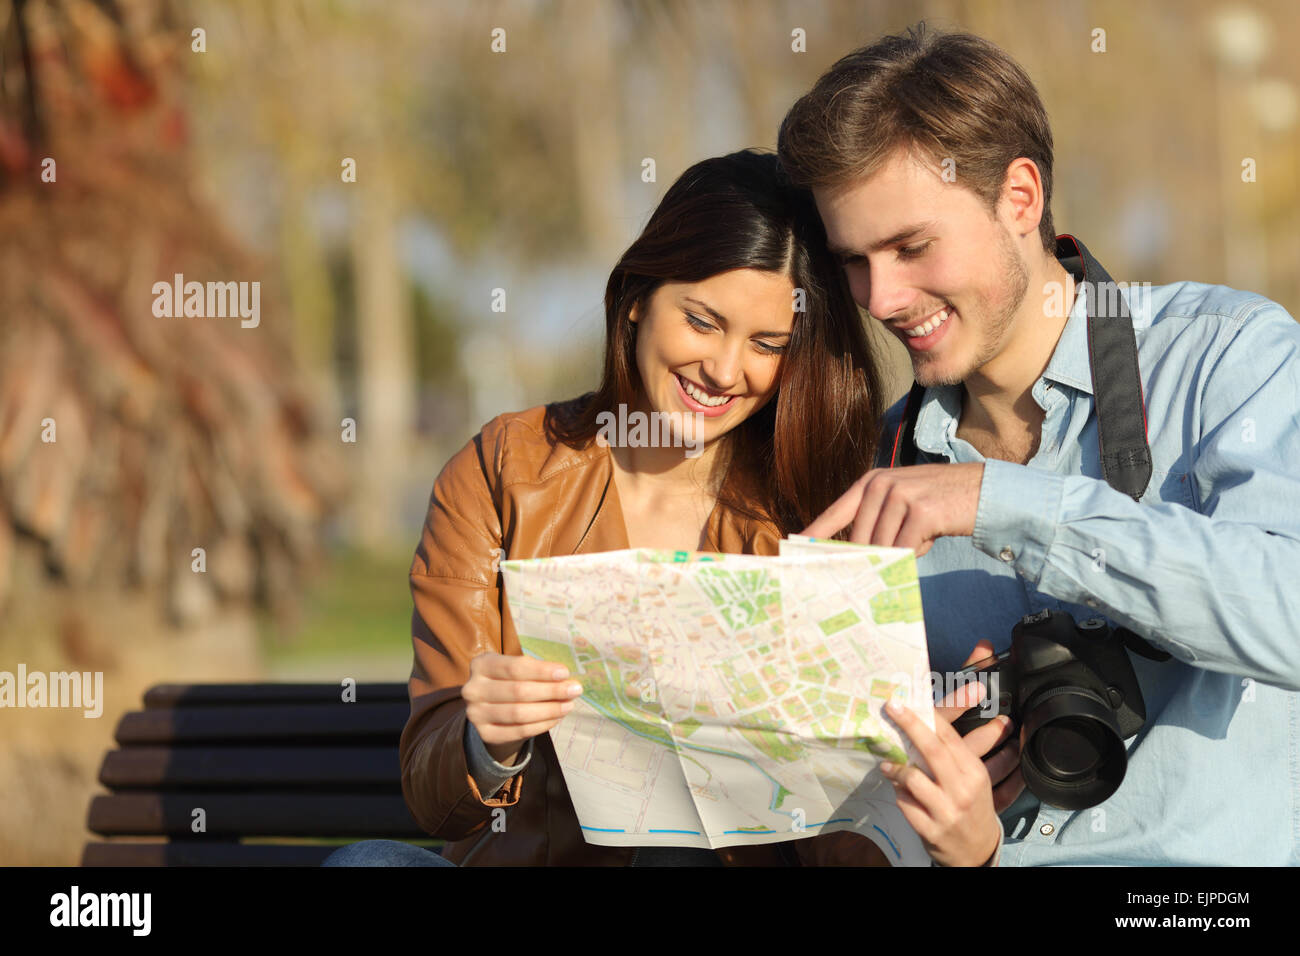 Happy tourists searching landmarks in a map sitting on a bench outdoors Stock Photo